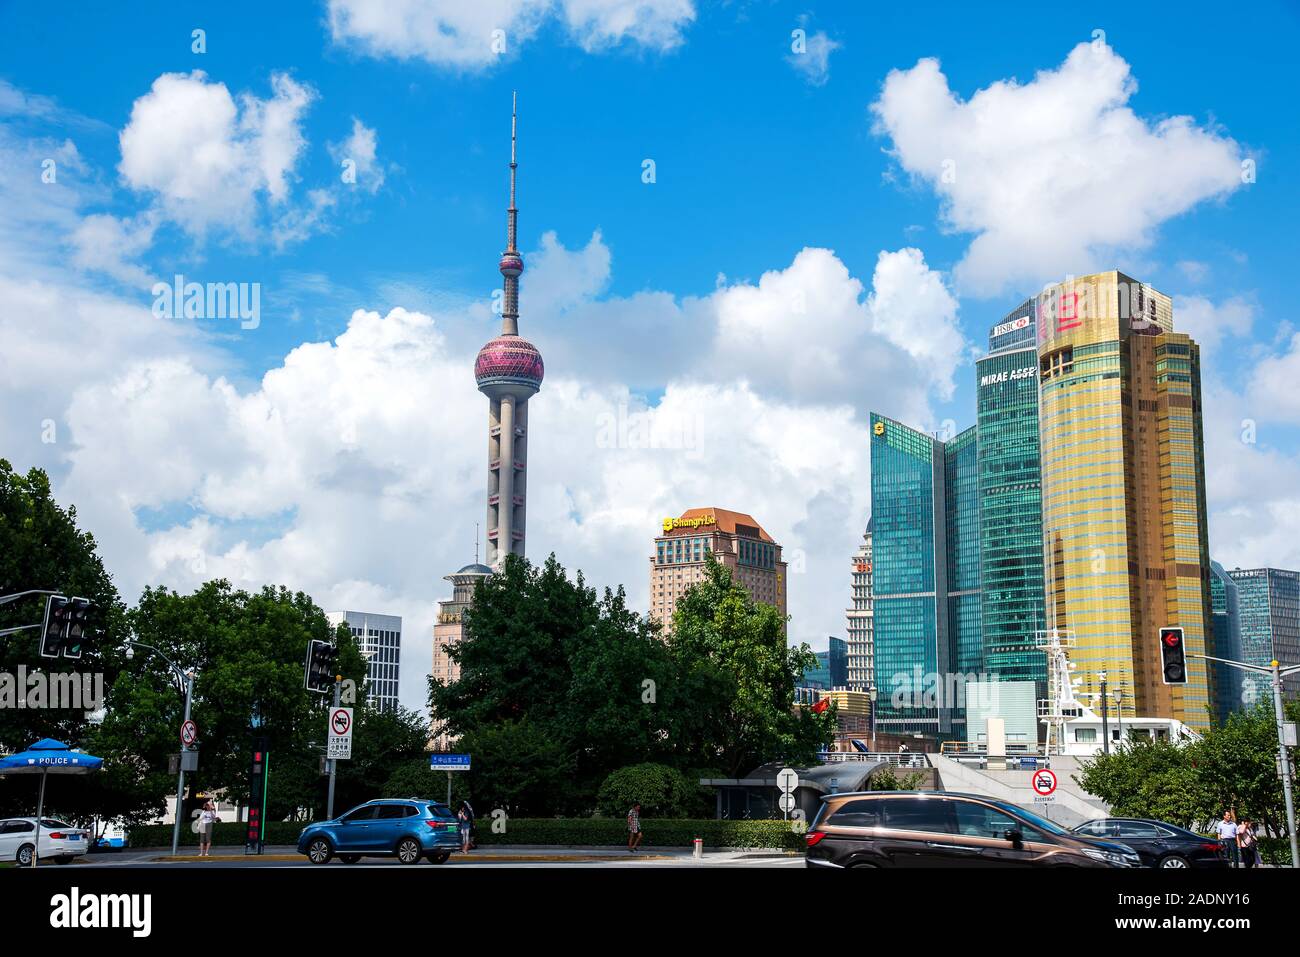 Shanghai, China - August 8, 2019: Shanghai modern downtown area with skyscrapers in Chinese metropolis at daytime Stock Photo